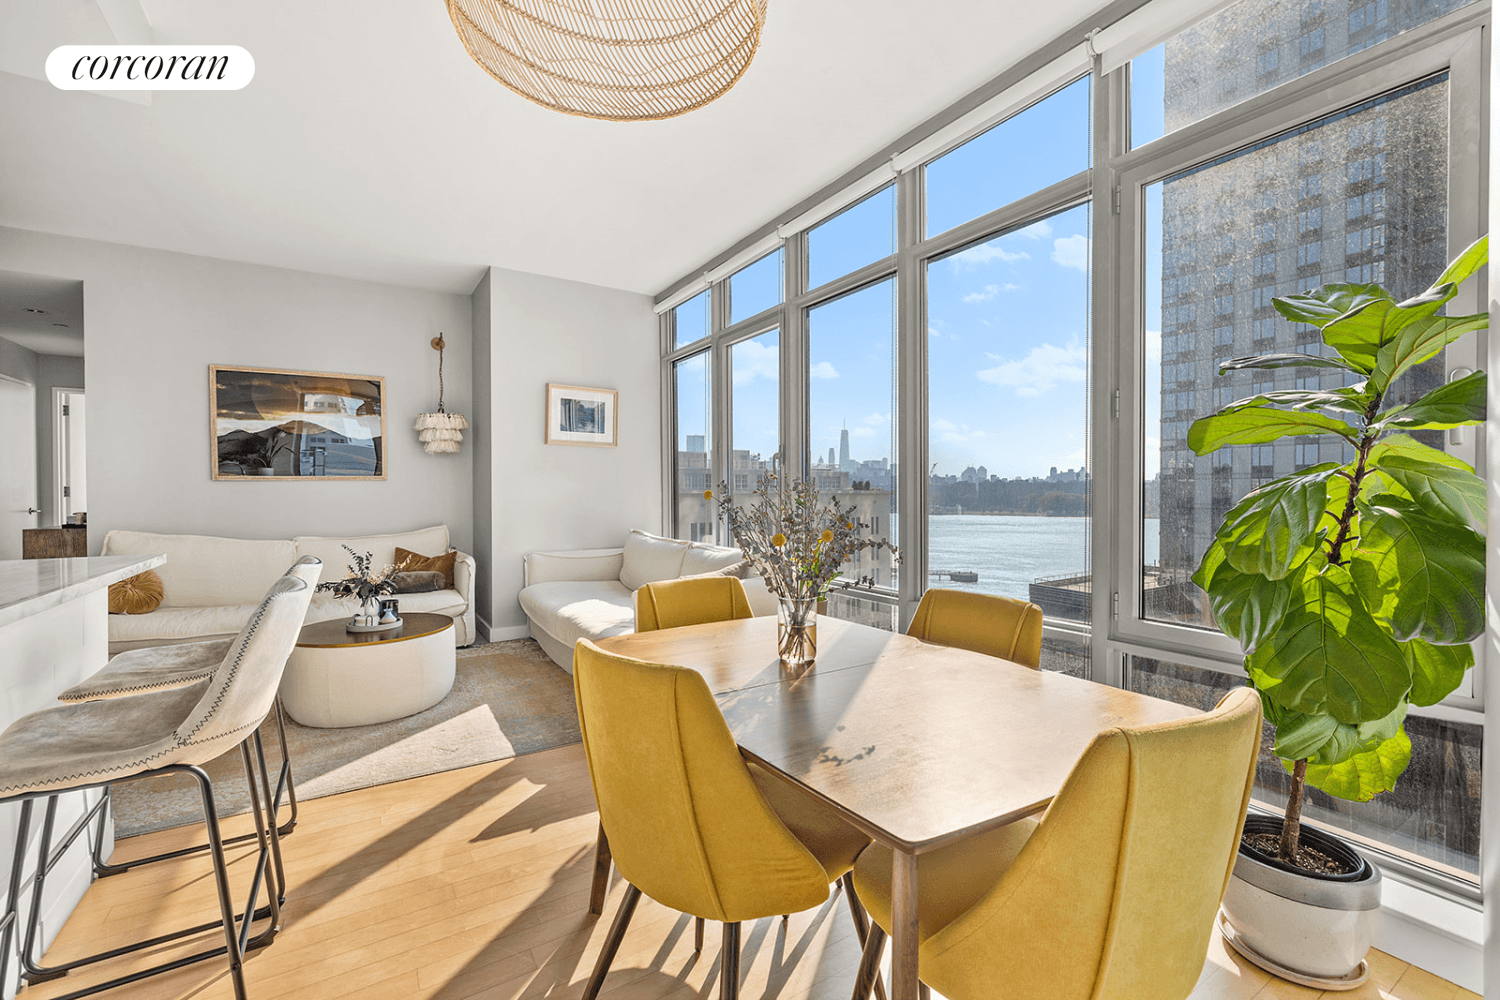 Sunset and city views from every room in this bright 1133 SF waterfront home.